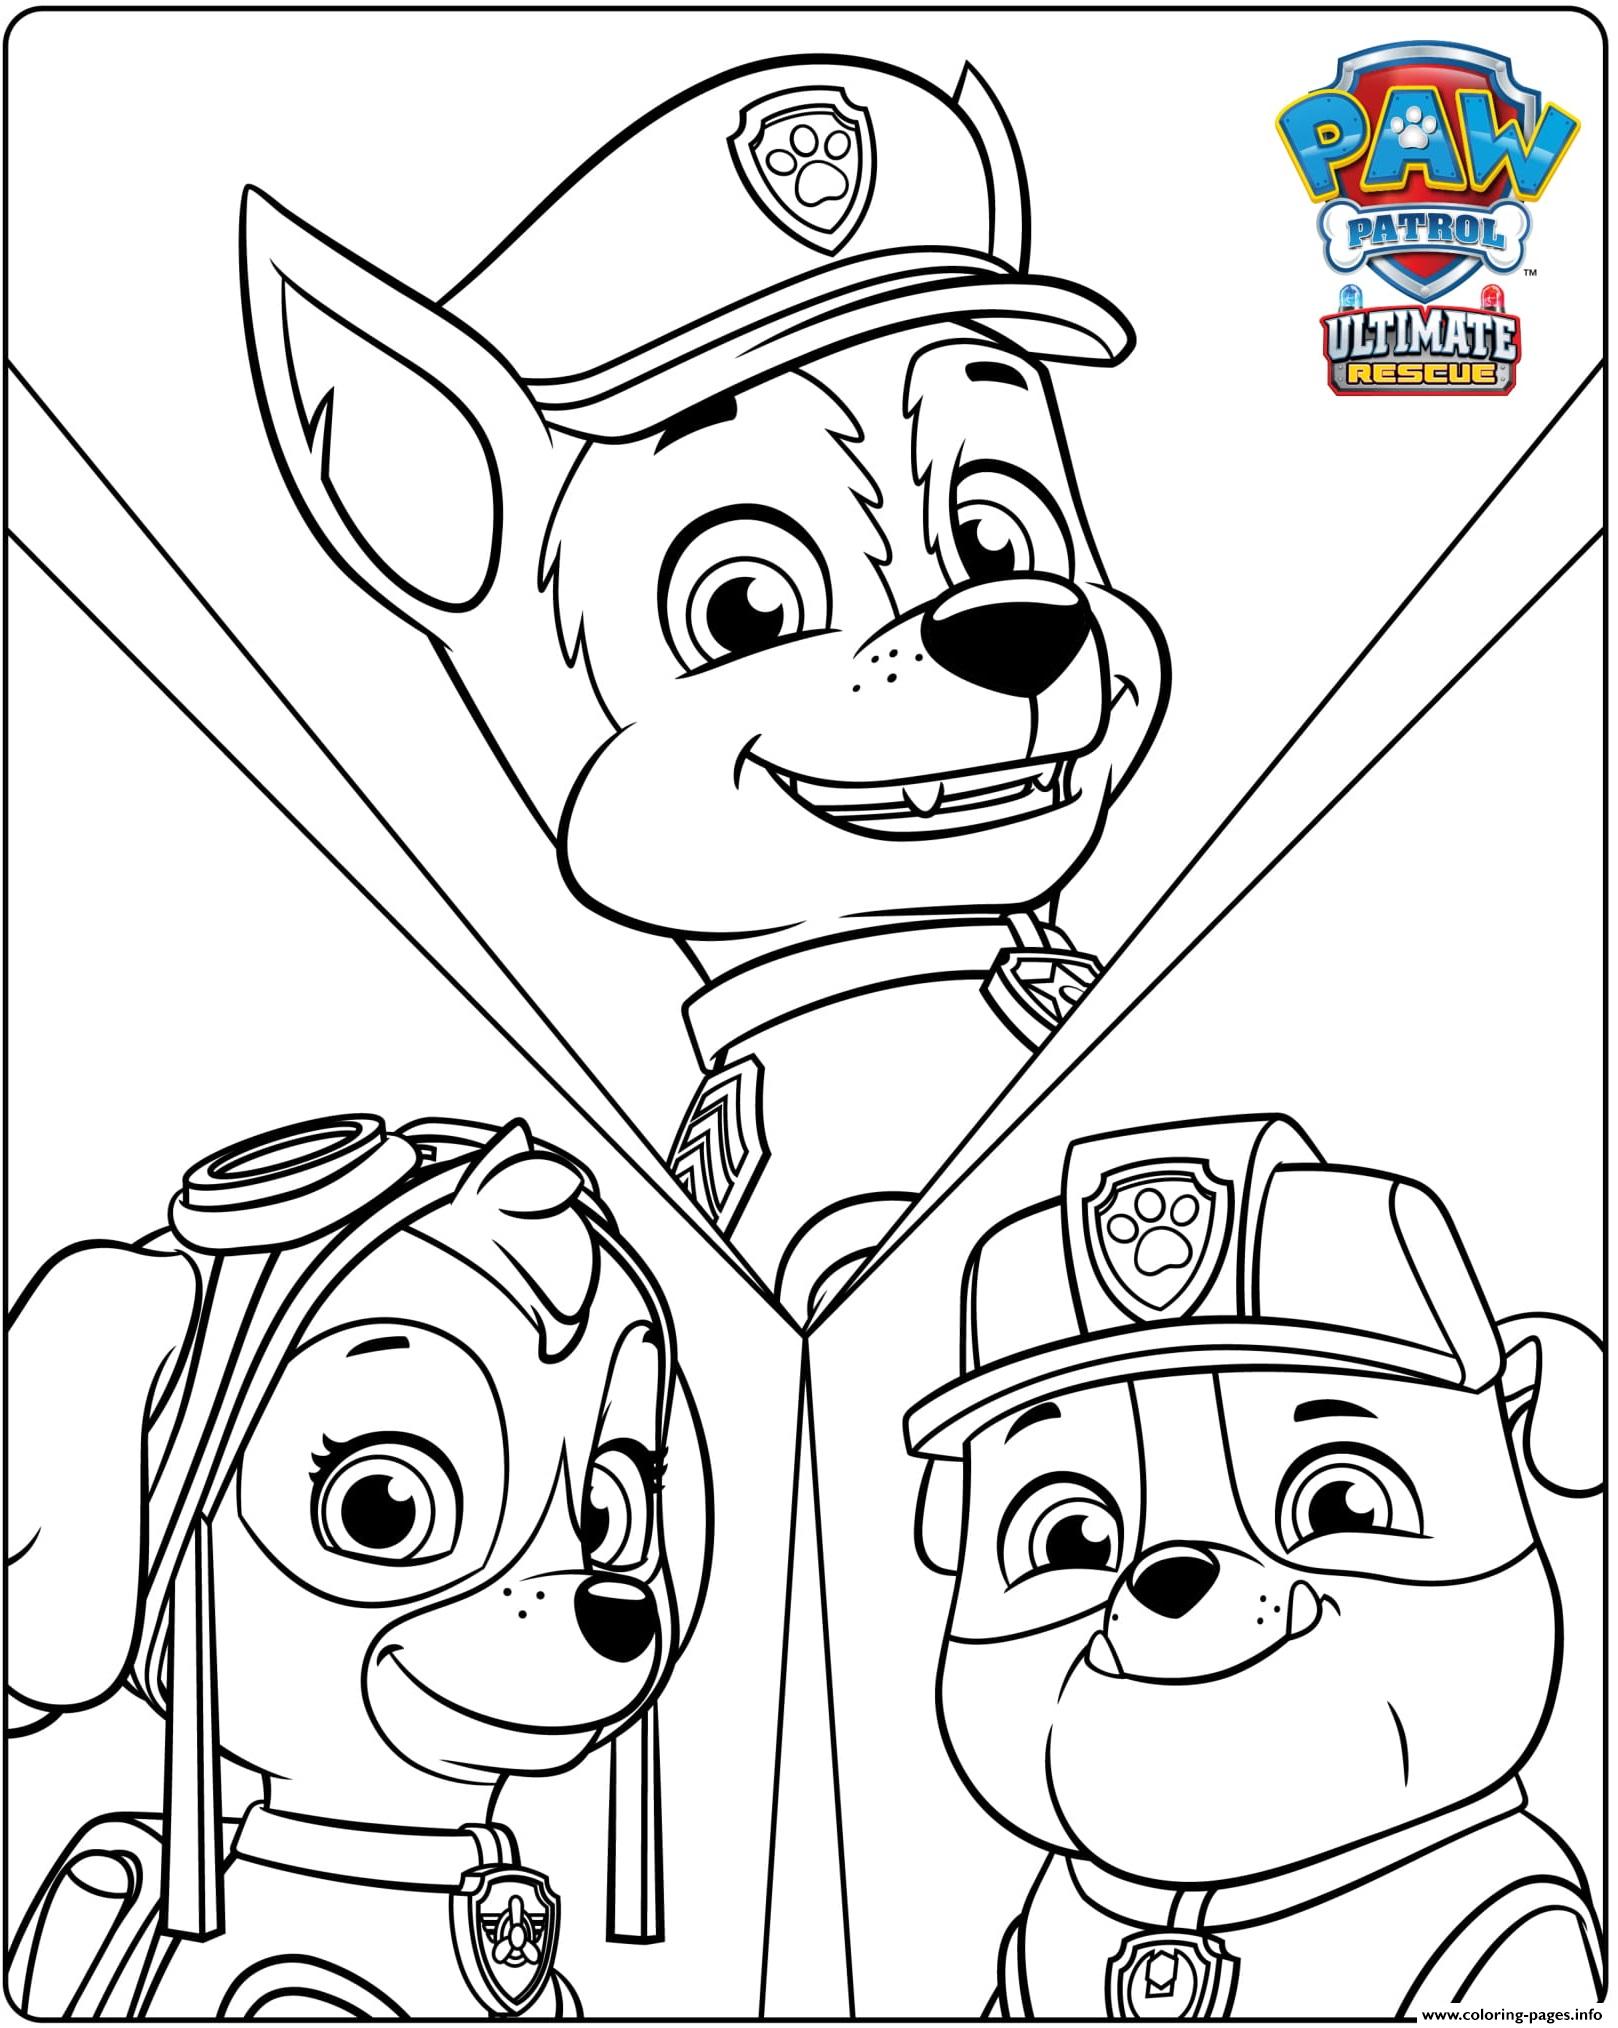 Paw Patrol Ultimate Rescue Chase Skye Rubble coloring